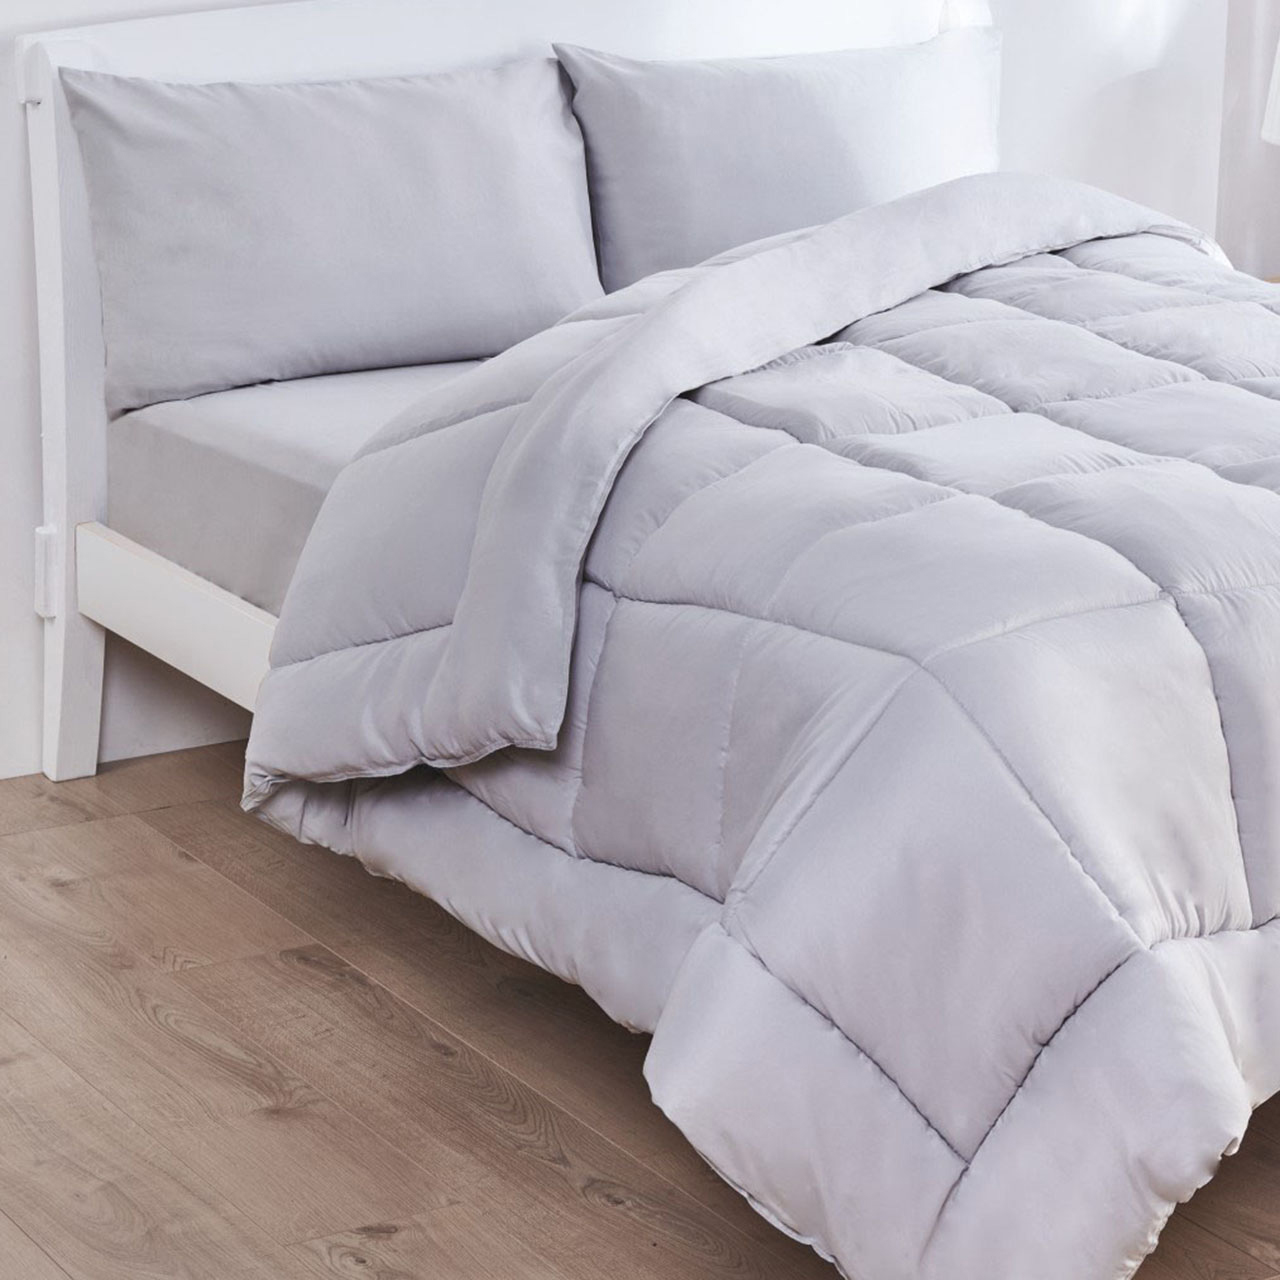 All-in-One Coverless Duvet and Bedding Bundle - 1.5 Tog